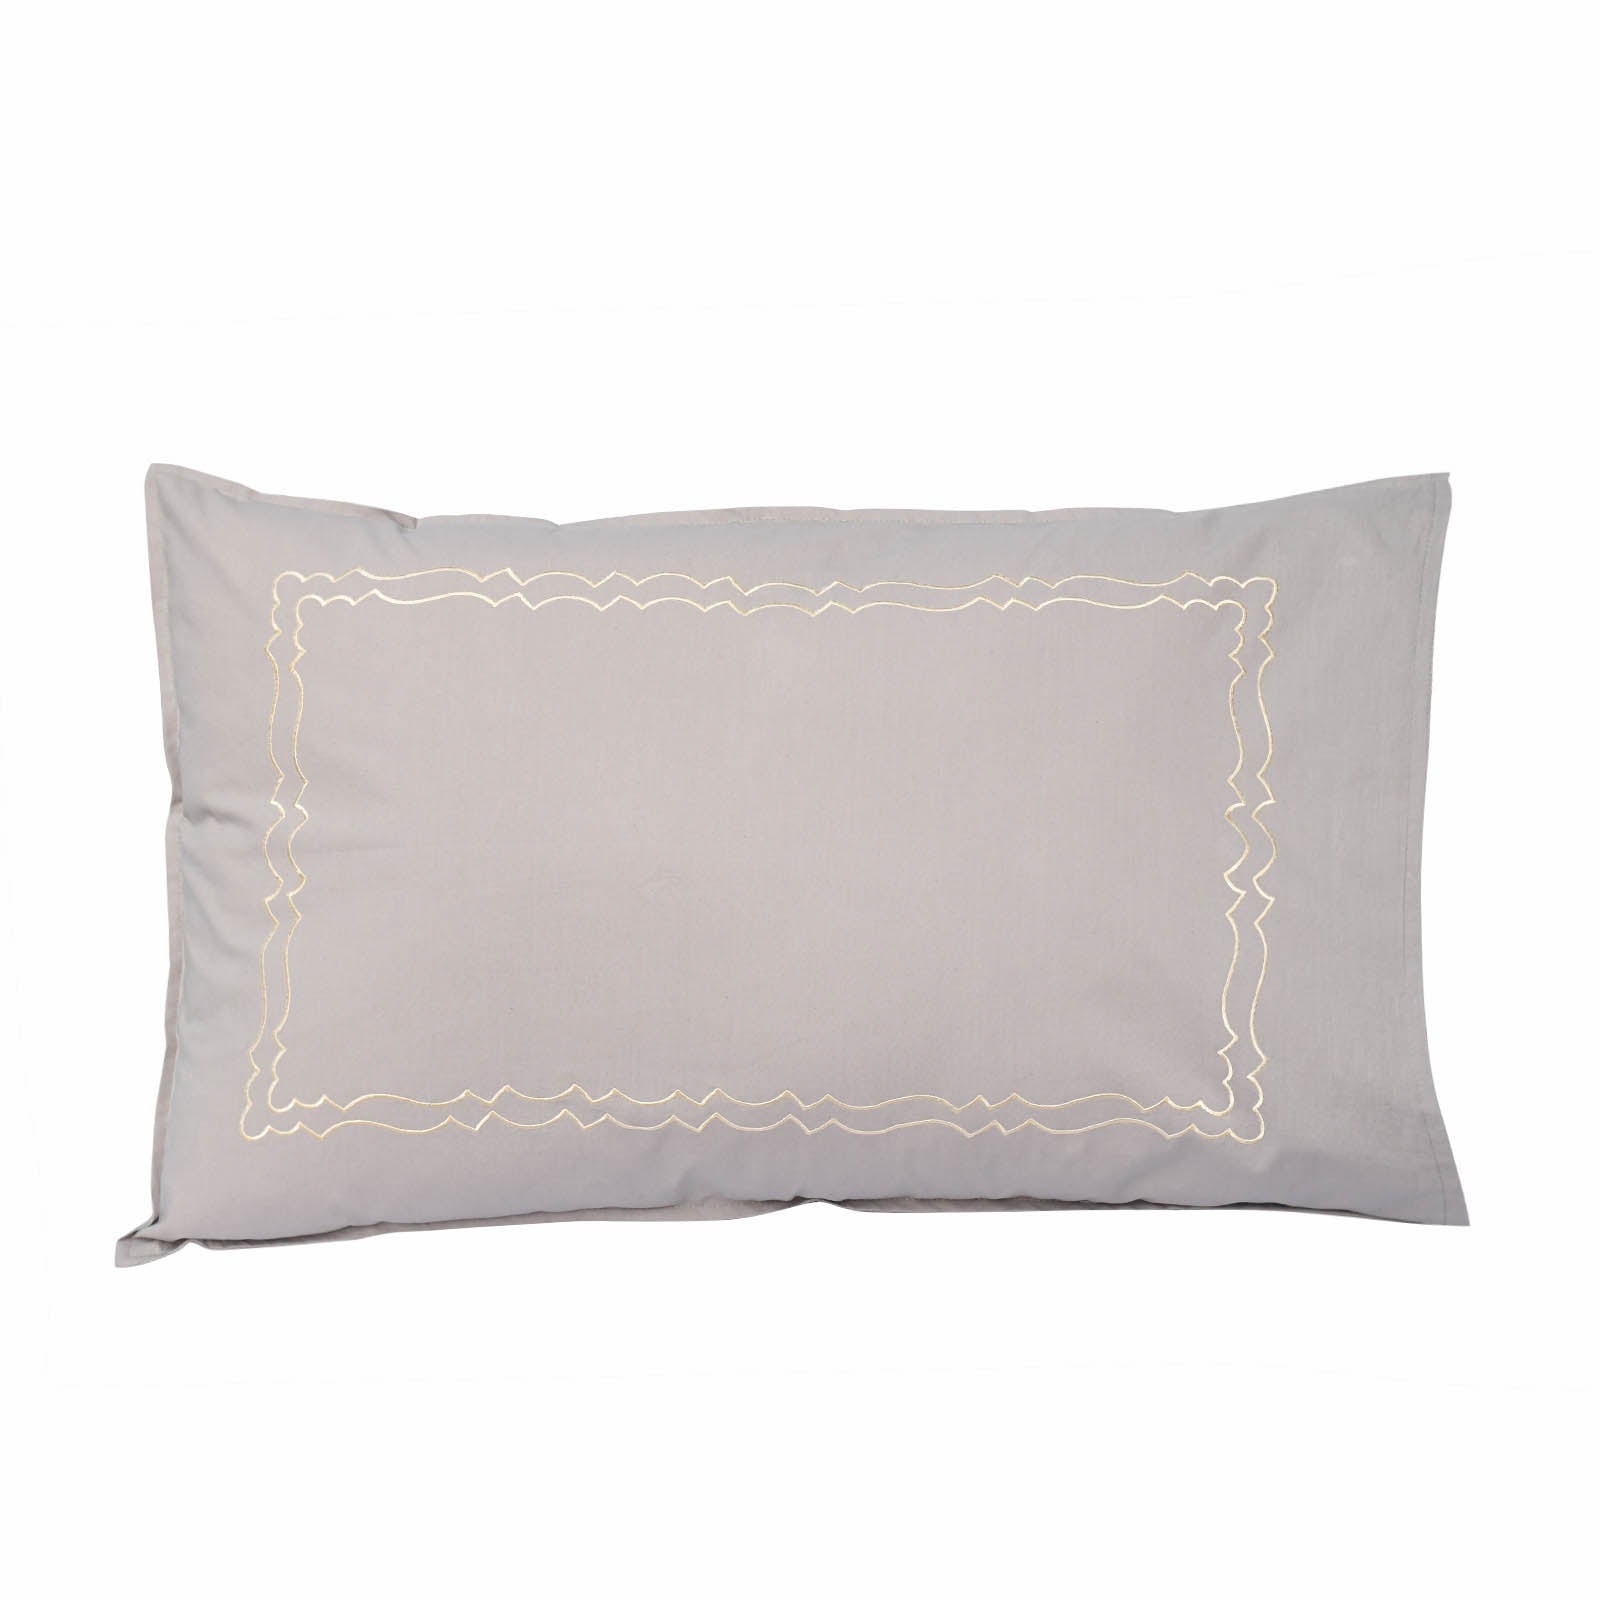 Scalloped Pillow Cover - Vintage Scalloped Grey